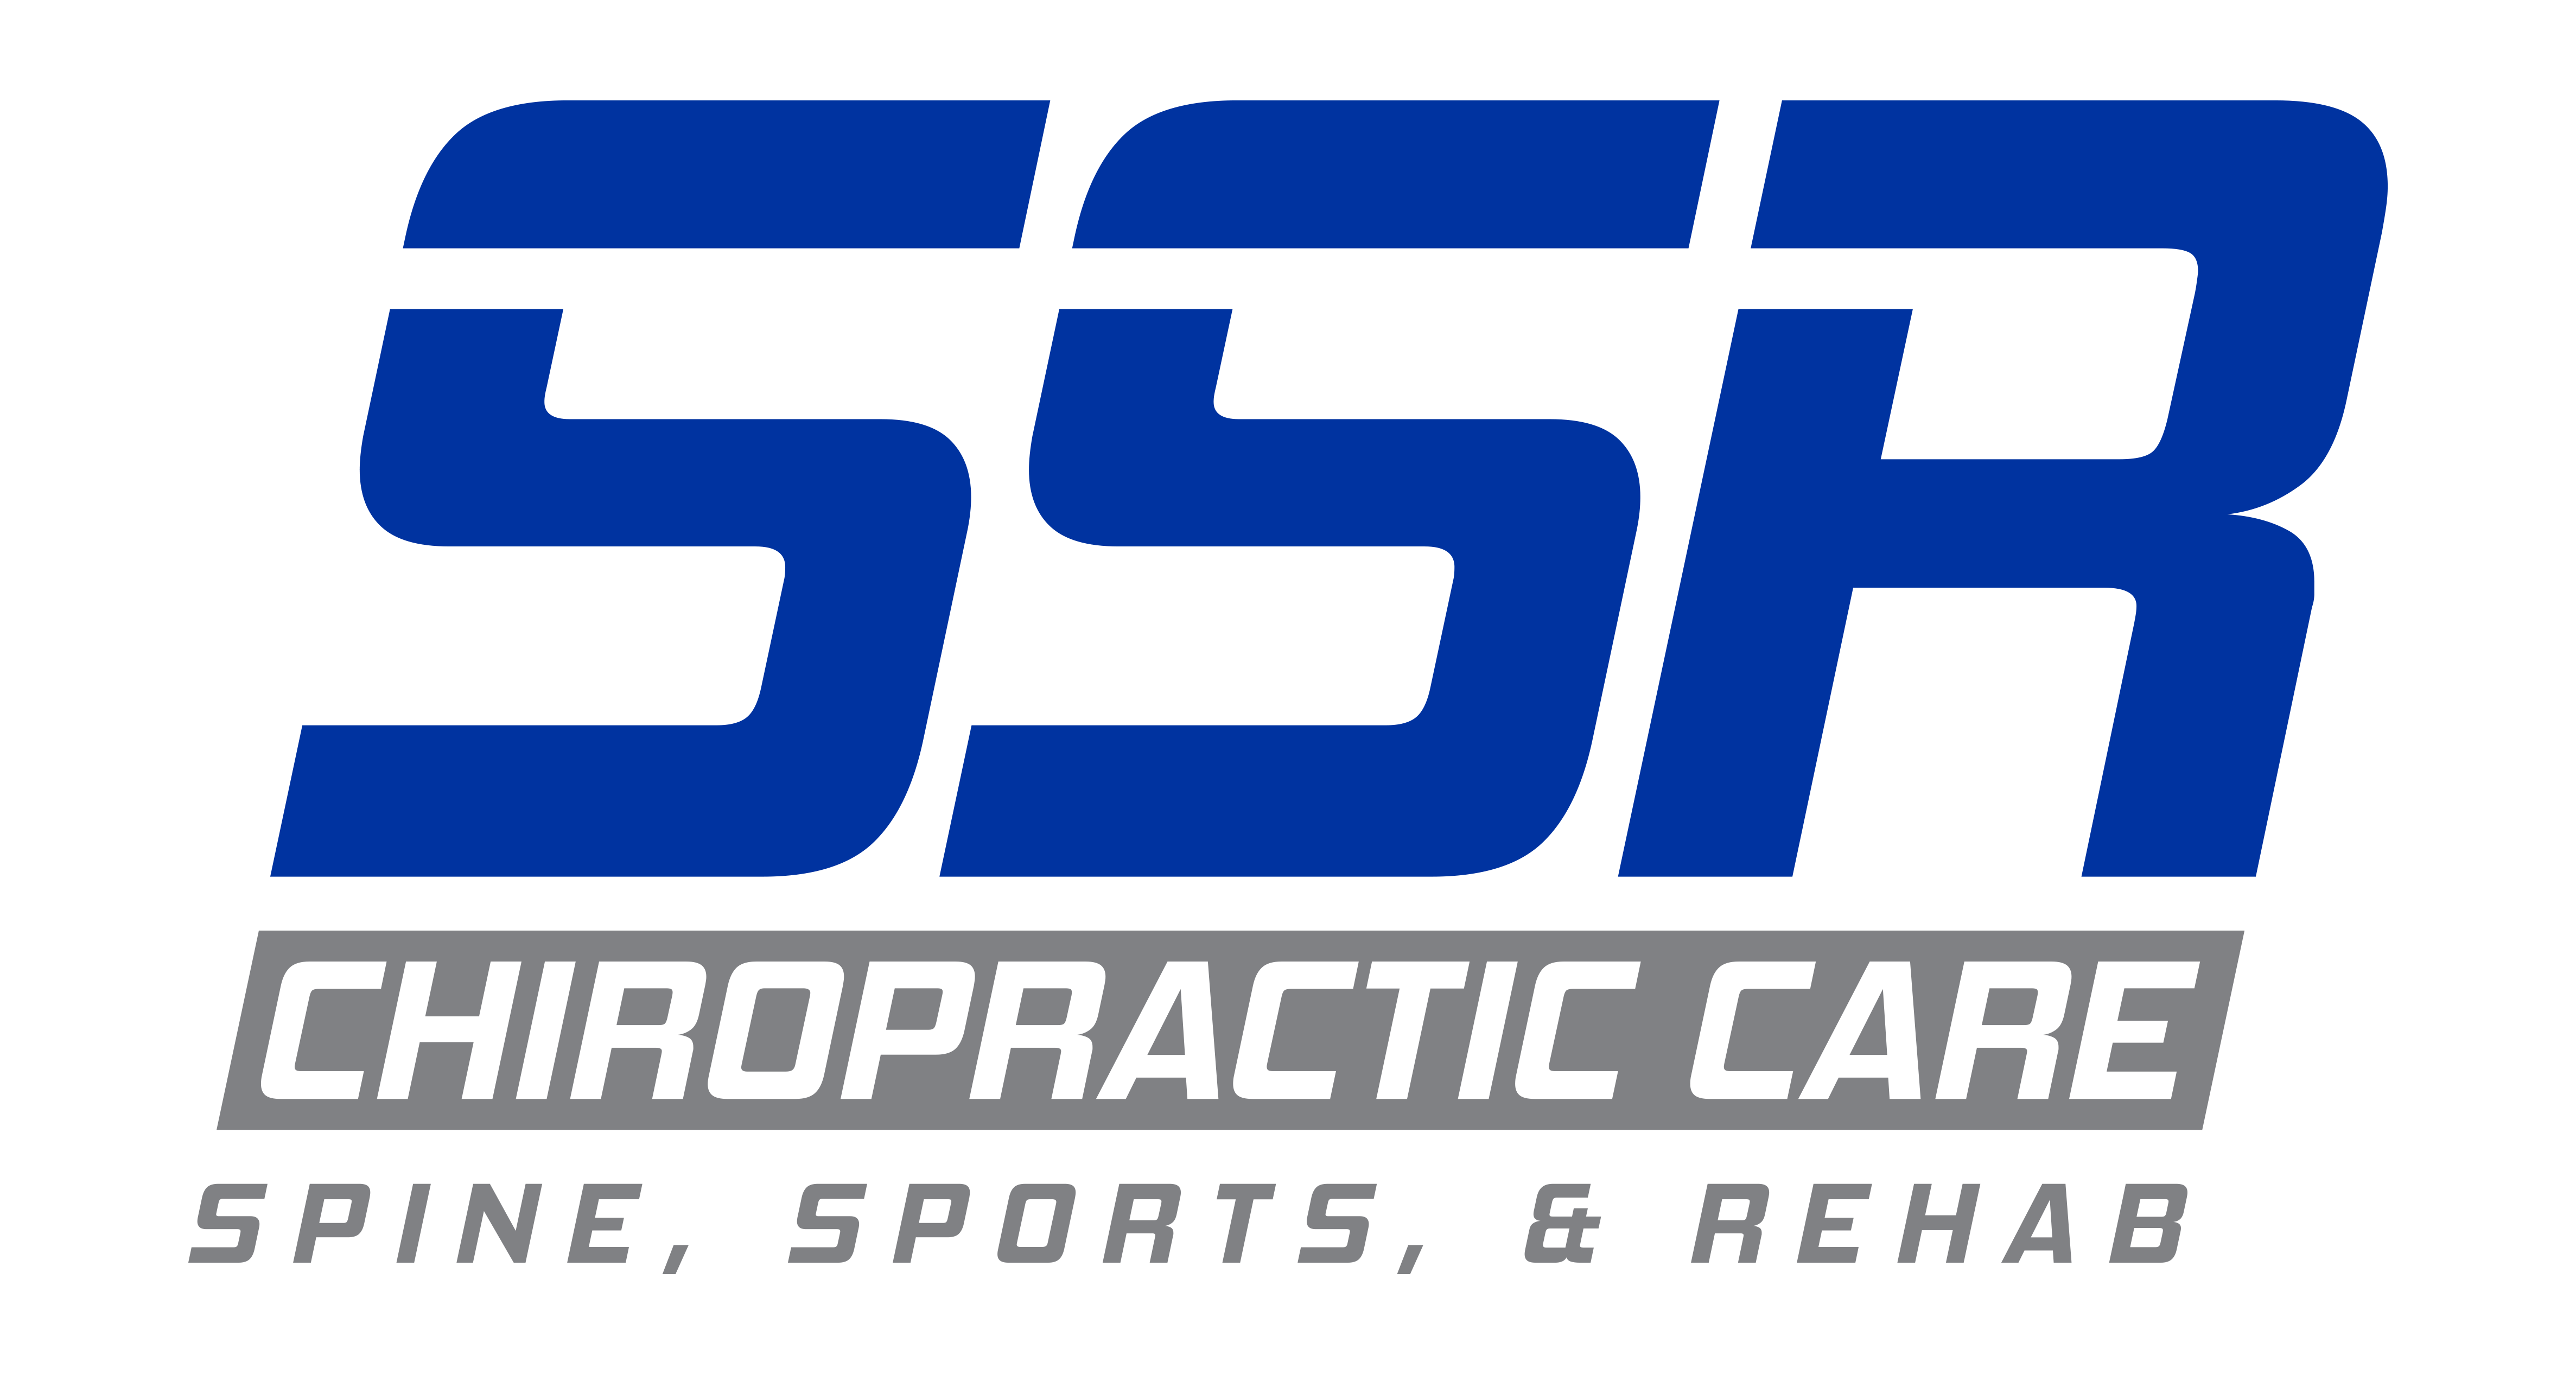 Spine, Sports, & Rehab Chiropractic Care